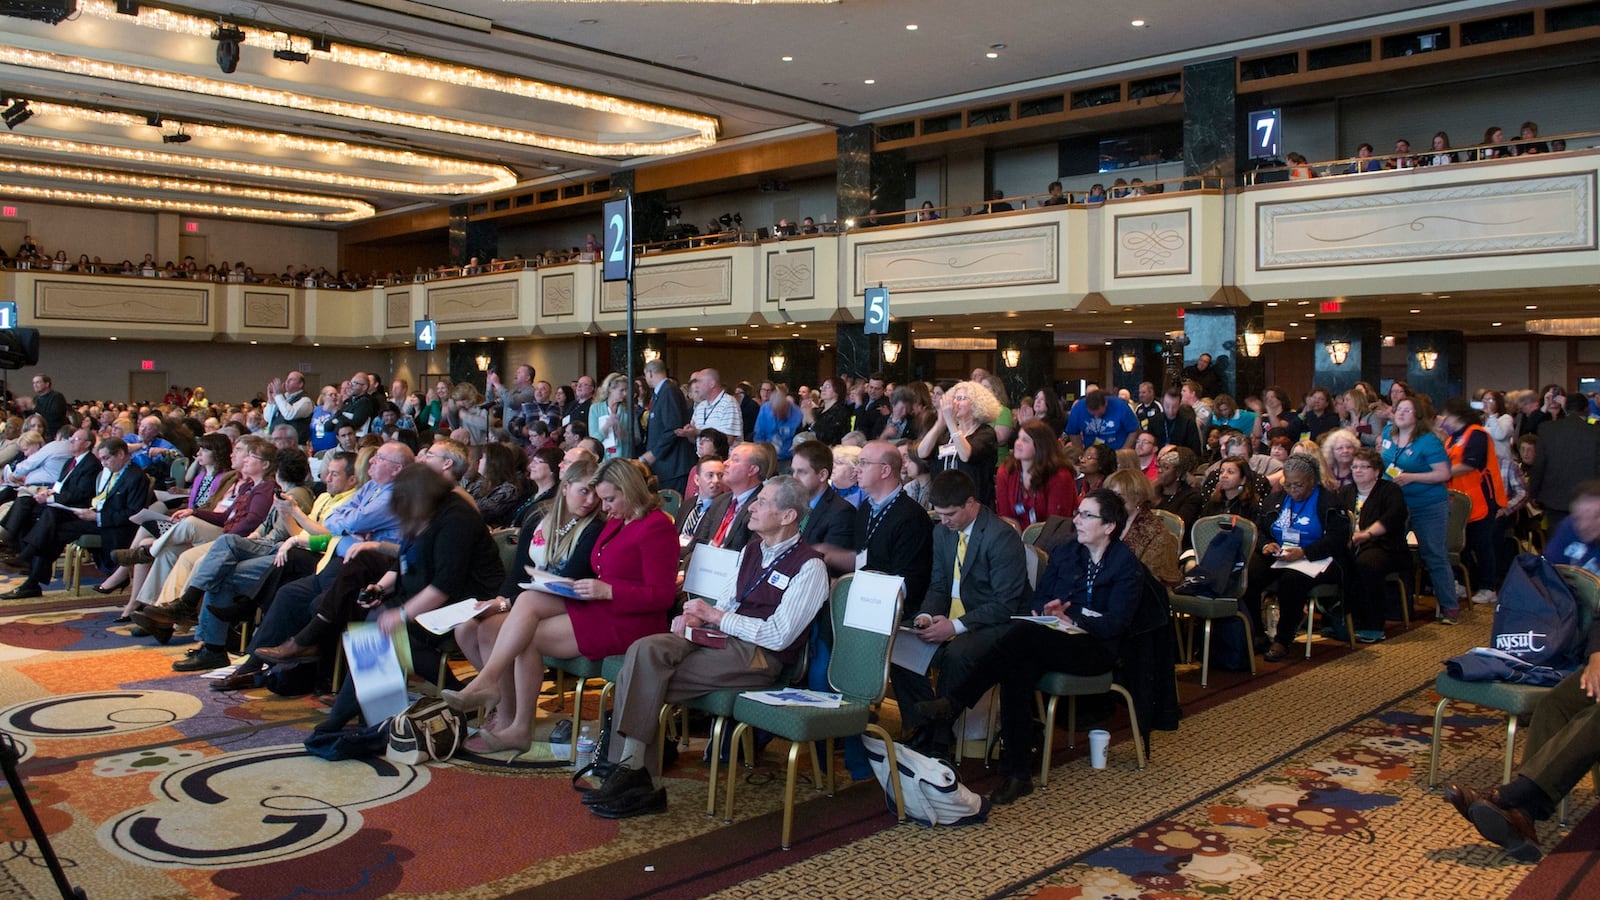 NYSUT delegates applaud following the no confidence vote against then-Commissioner John King on April 5, 2014.